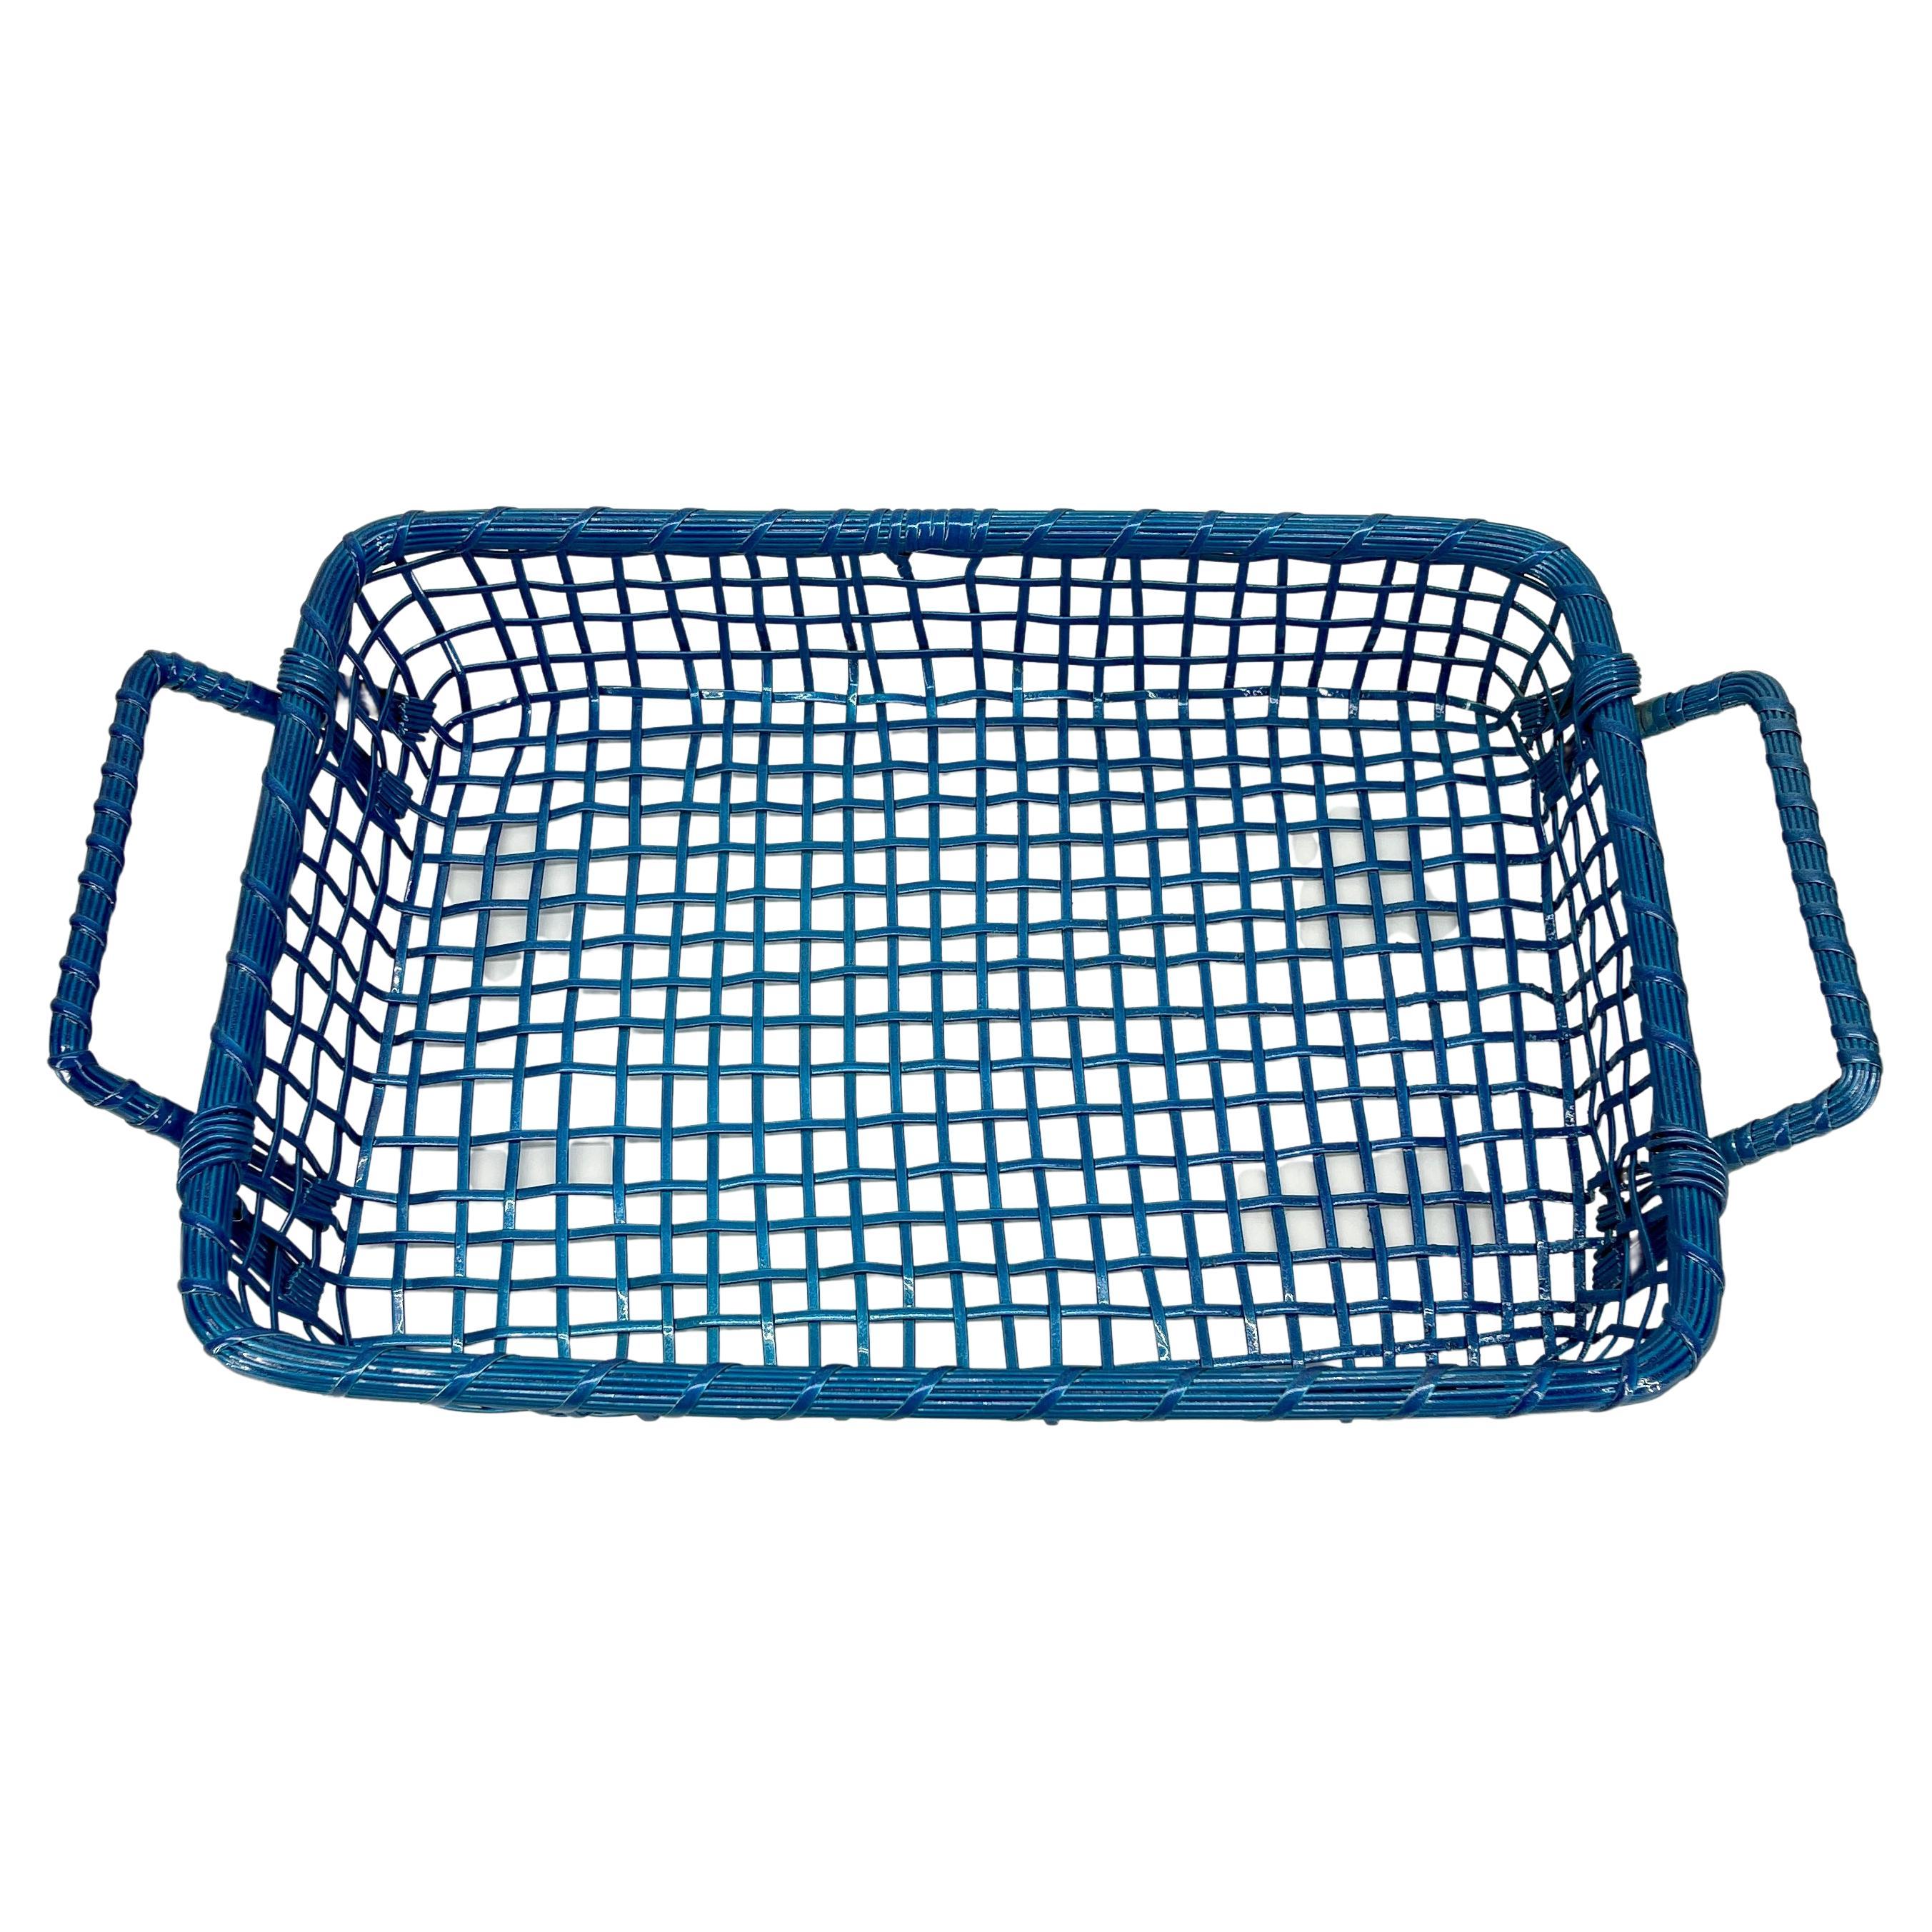 Small Maui blue metal flat wire basket tray with two handles
The basket is newly powder-coated in Maui blue color.